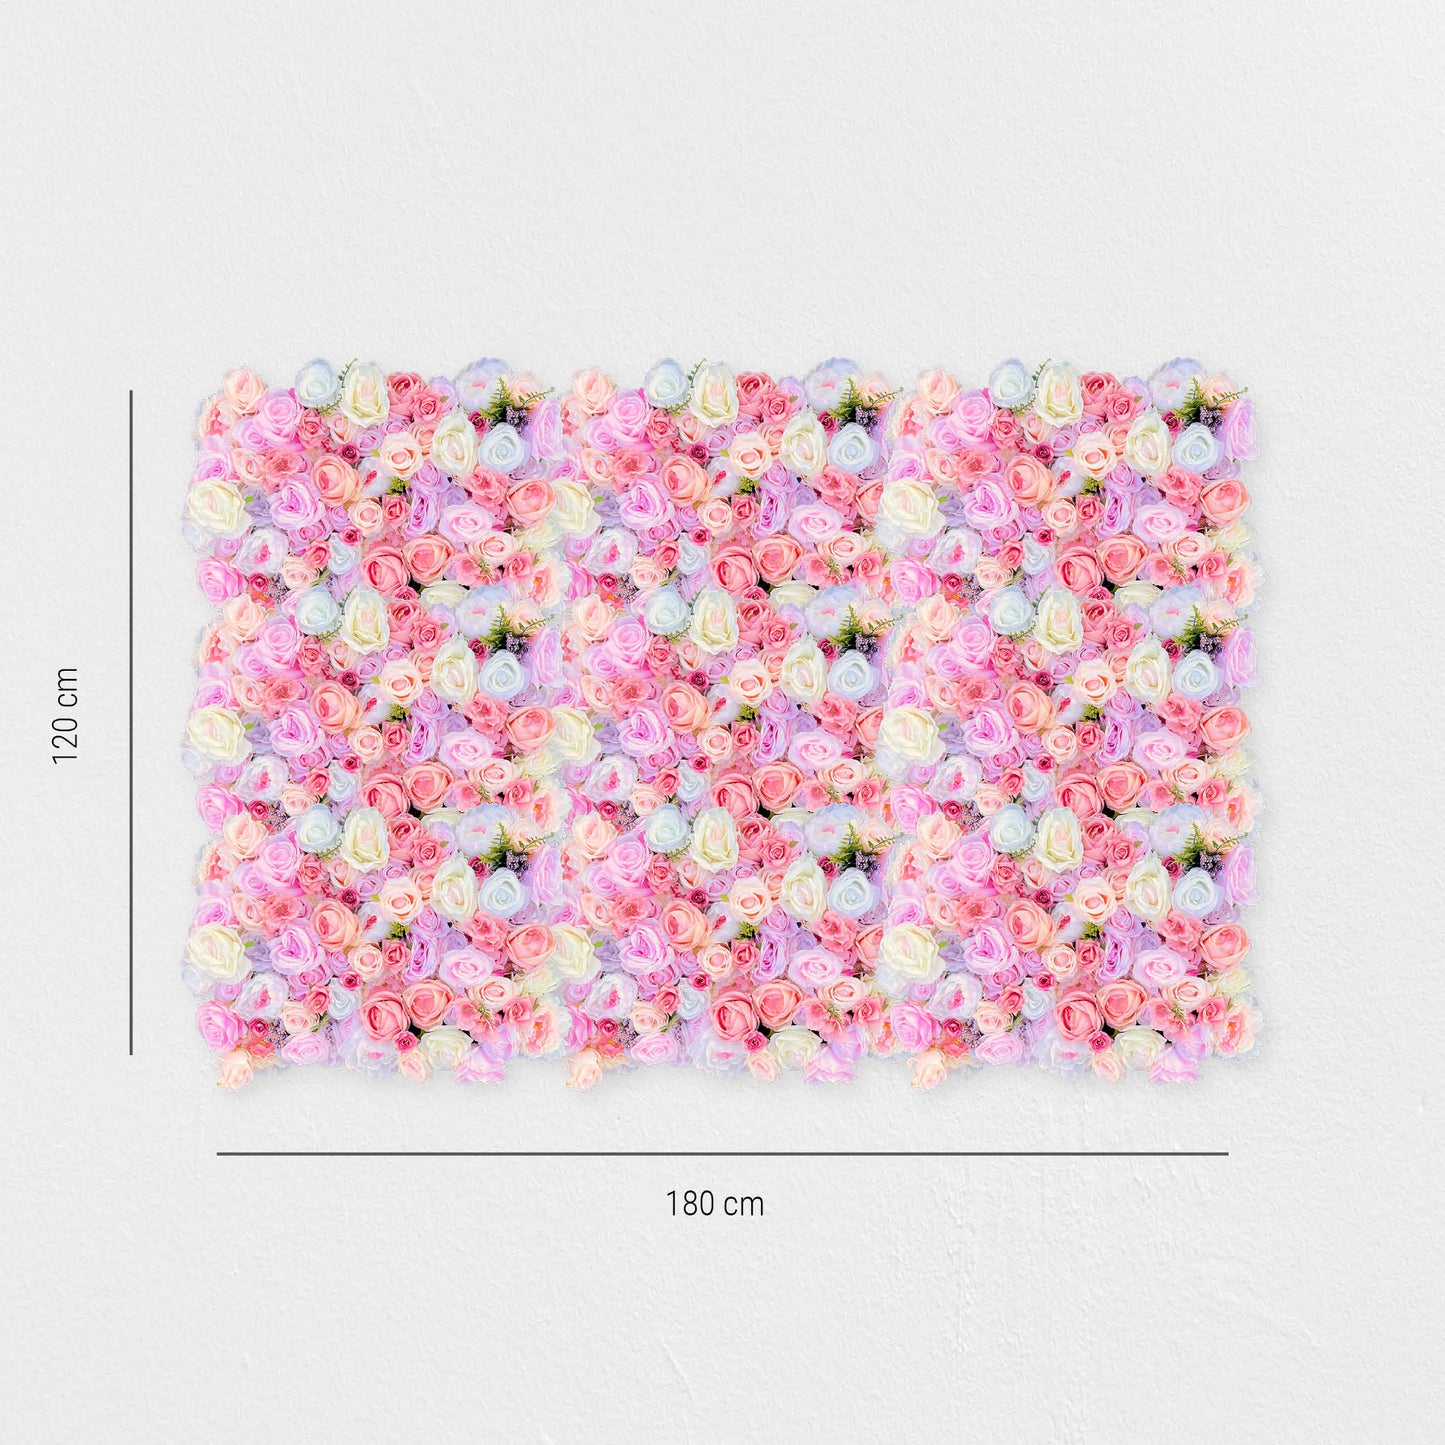 Flower wall "BLOOMYLICIOUS" made of Realtouch artificial plants